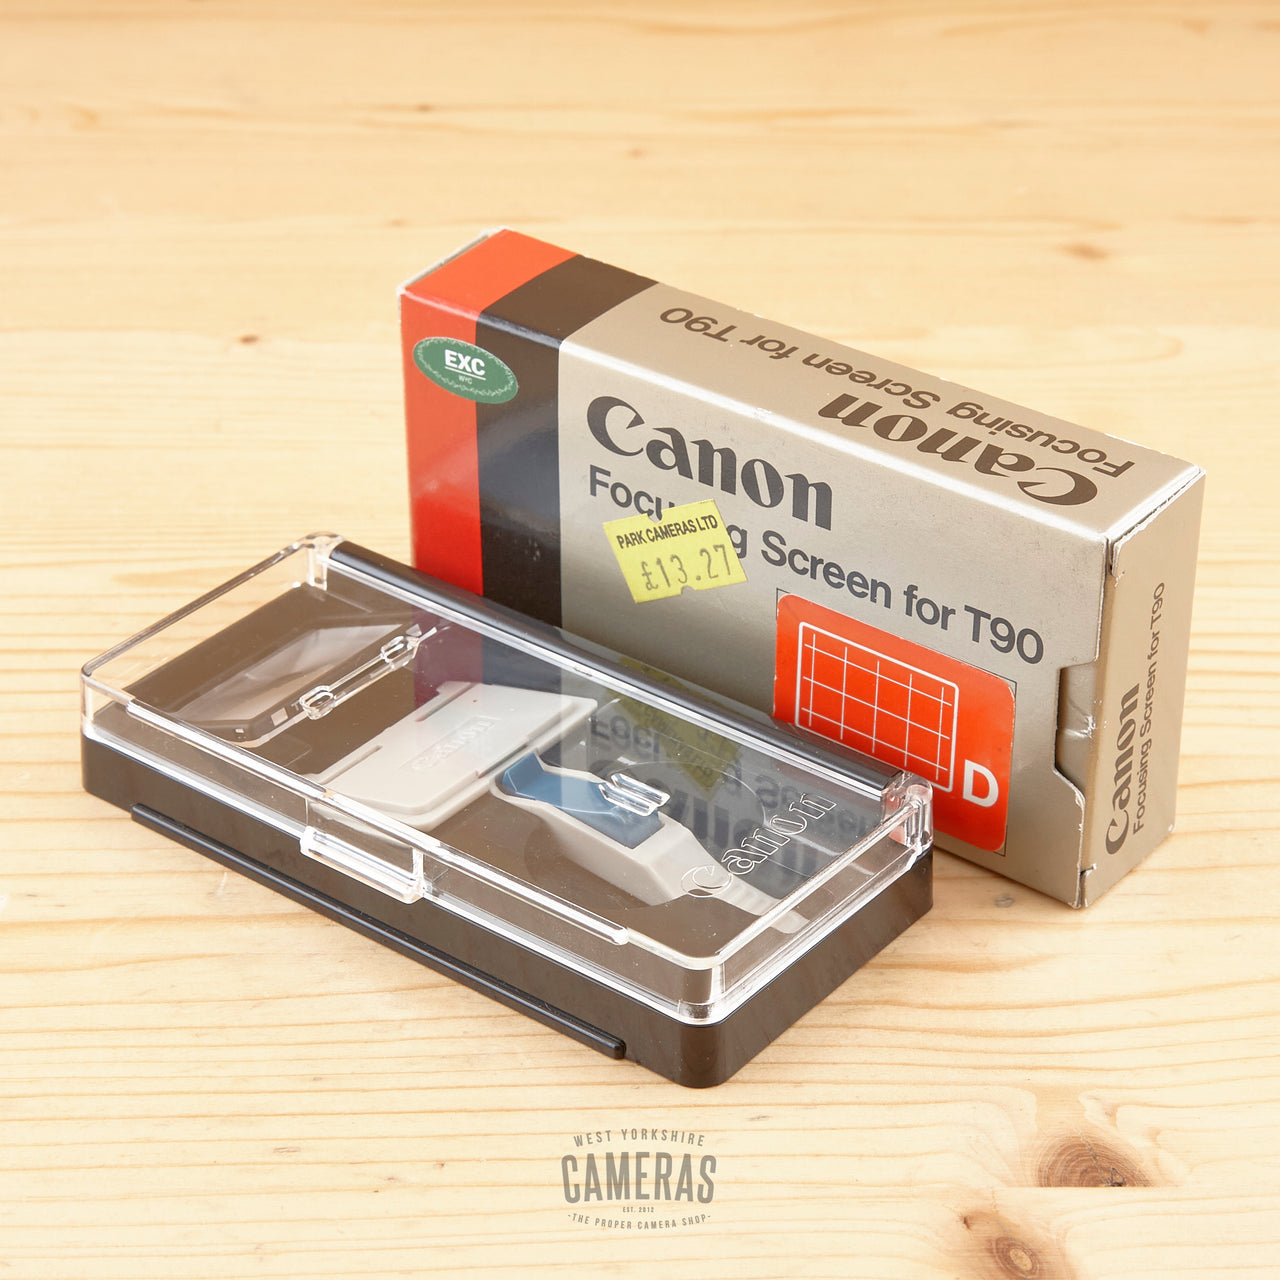 Canon Focusing Screen D for T90 Exc Boxed